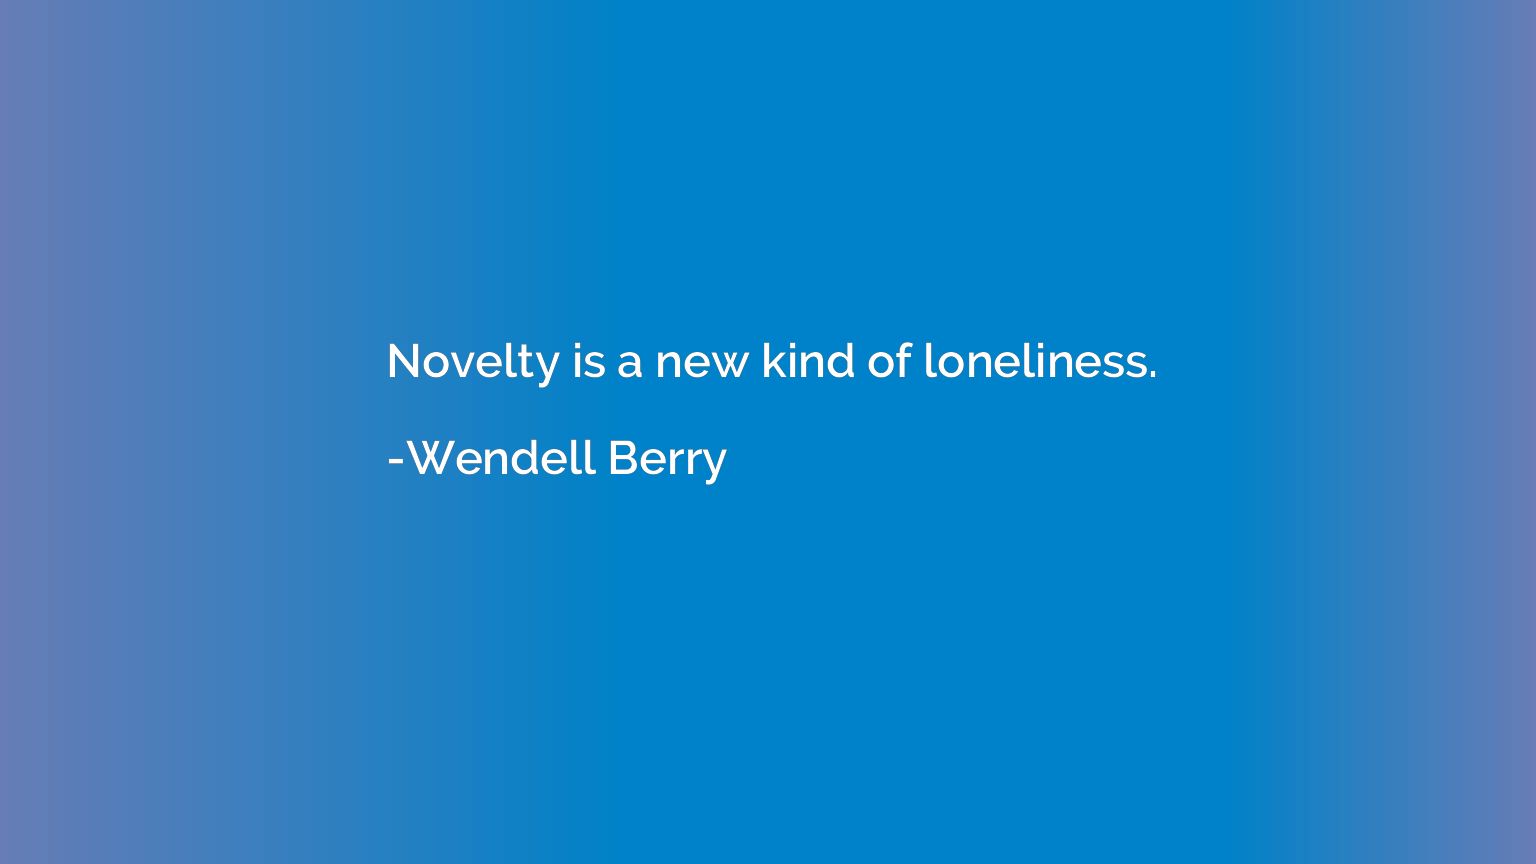 Novelty is a new kind of loneliness.